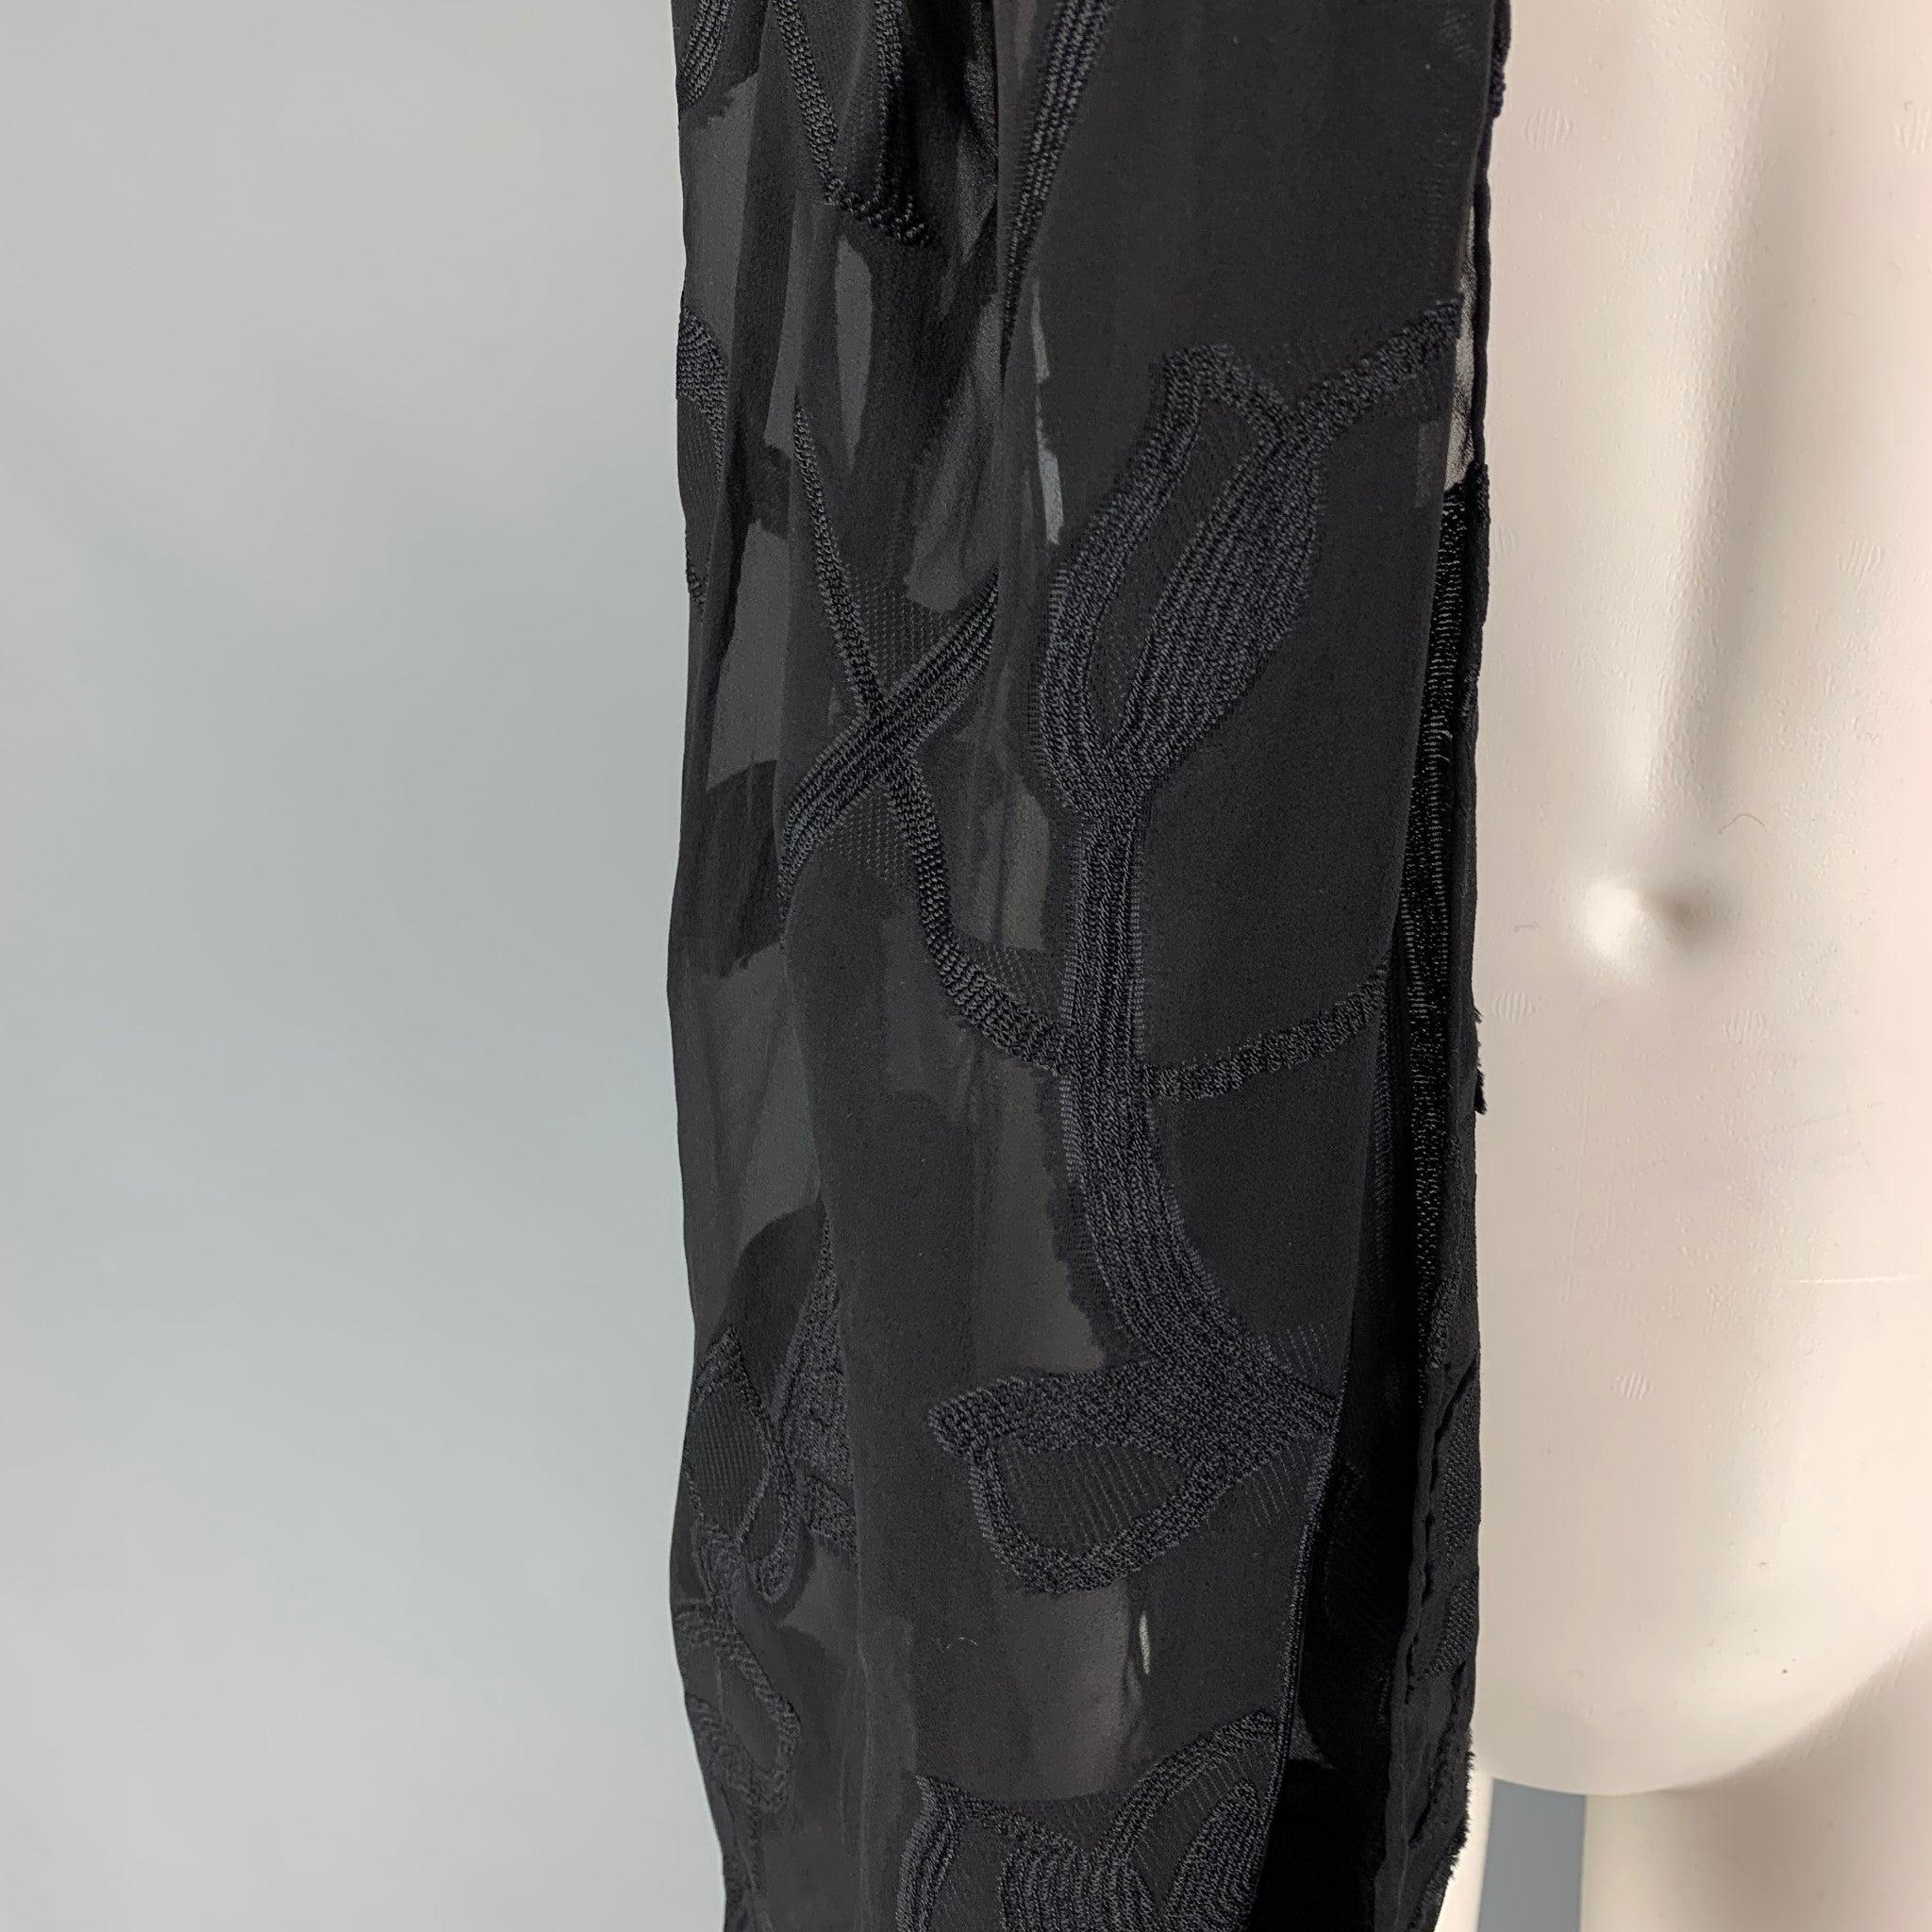 GIORGIO ARMANI scarf comes in a black embroidered rayon blend. Made in Italy.
Very Good
Pre-Owned Condition. 

Measurements: 
  60 inches  x 26.5 inches 
  
  
 
Reference: 119785
Category: Scarves
More Details
    
Brand:  GIORGIO ARMANI
Color: 